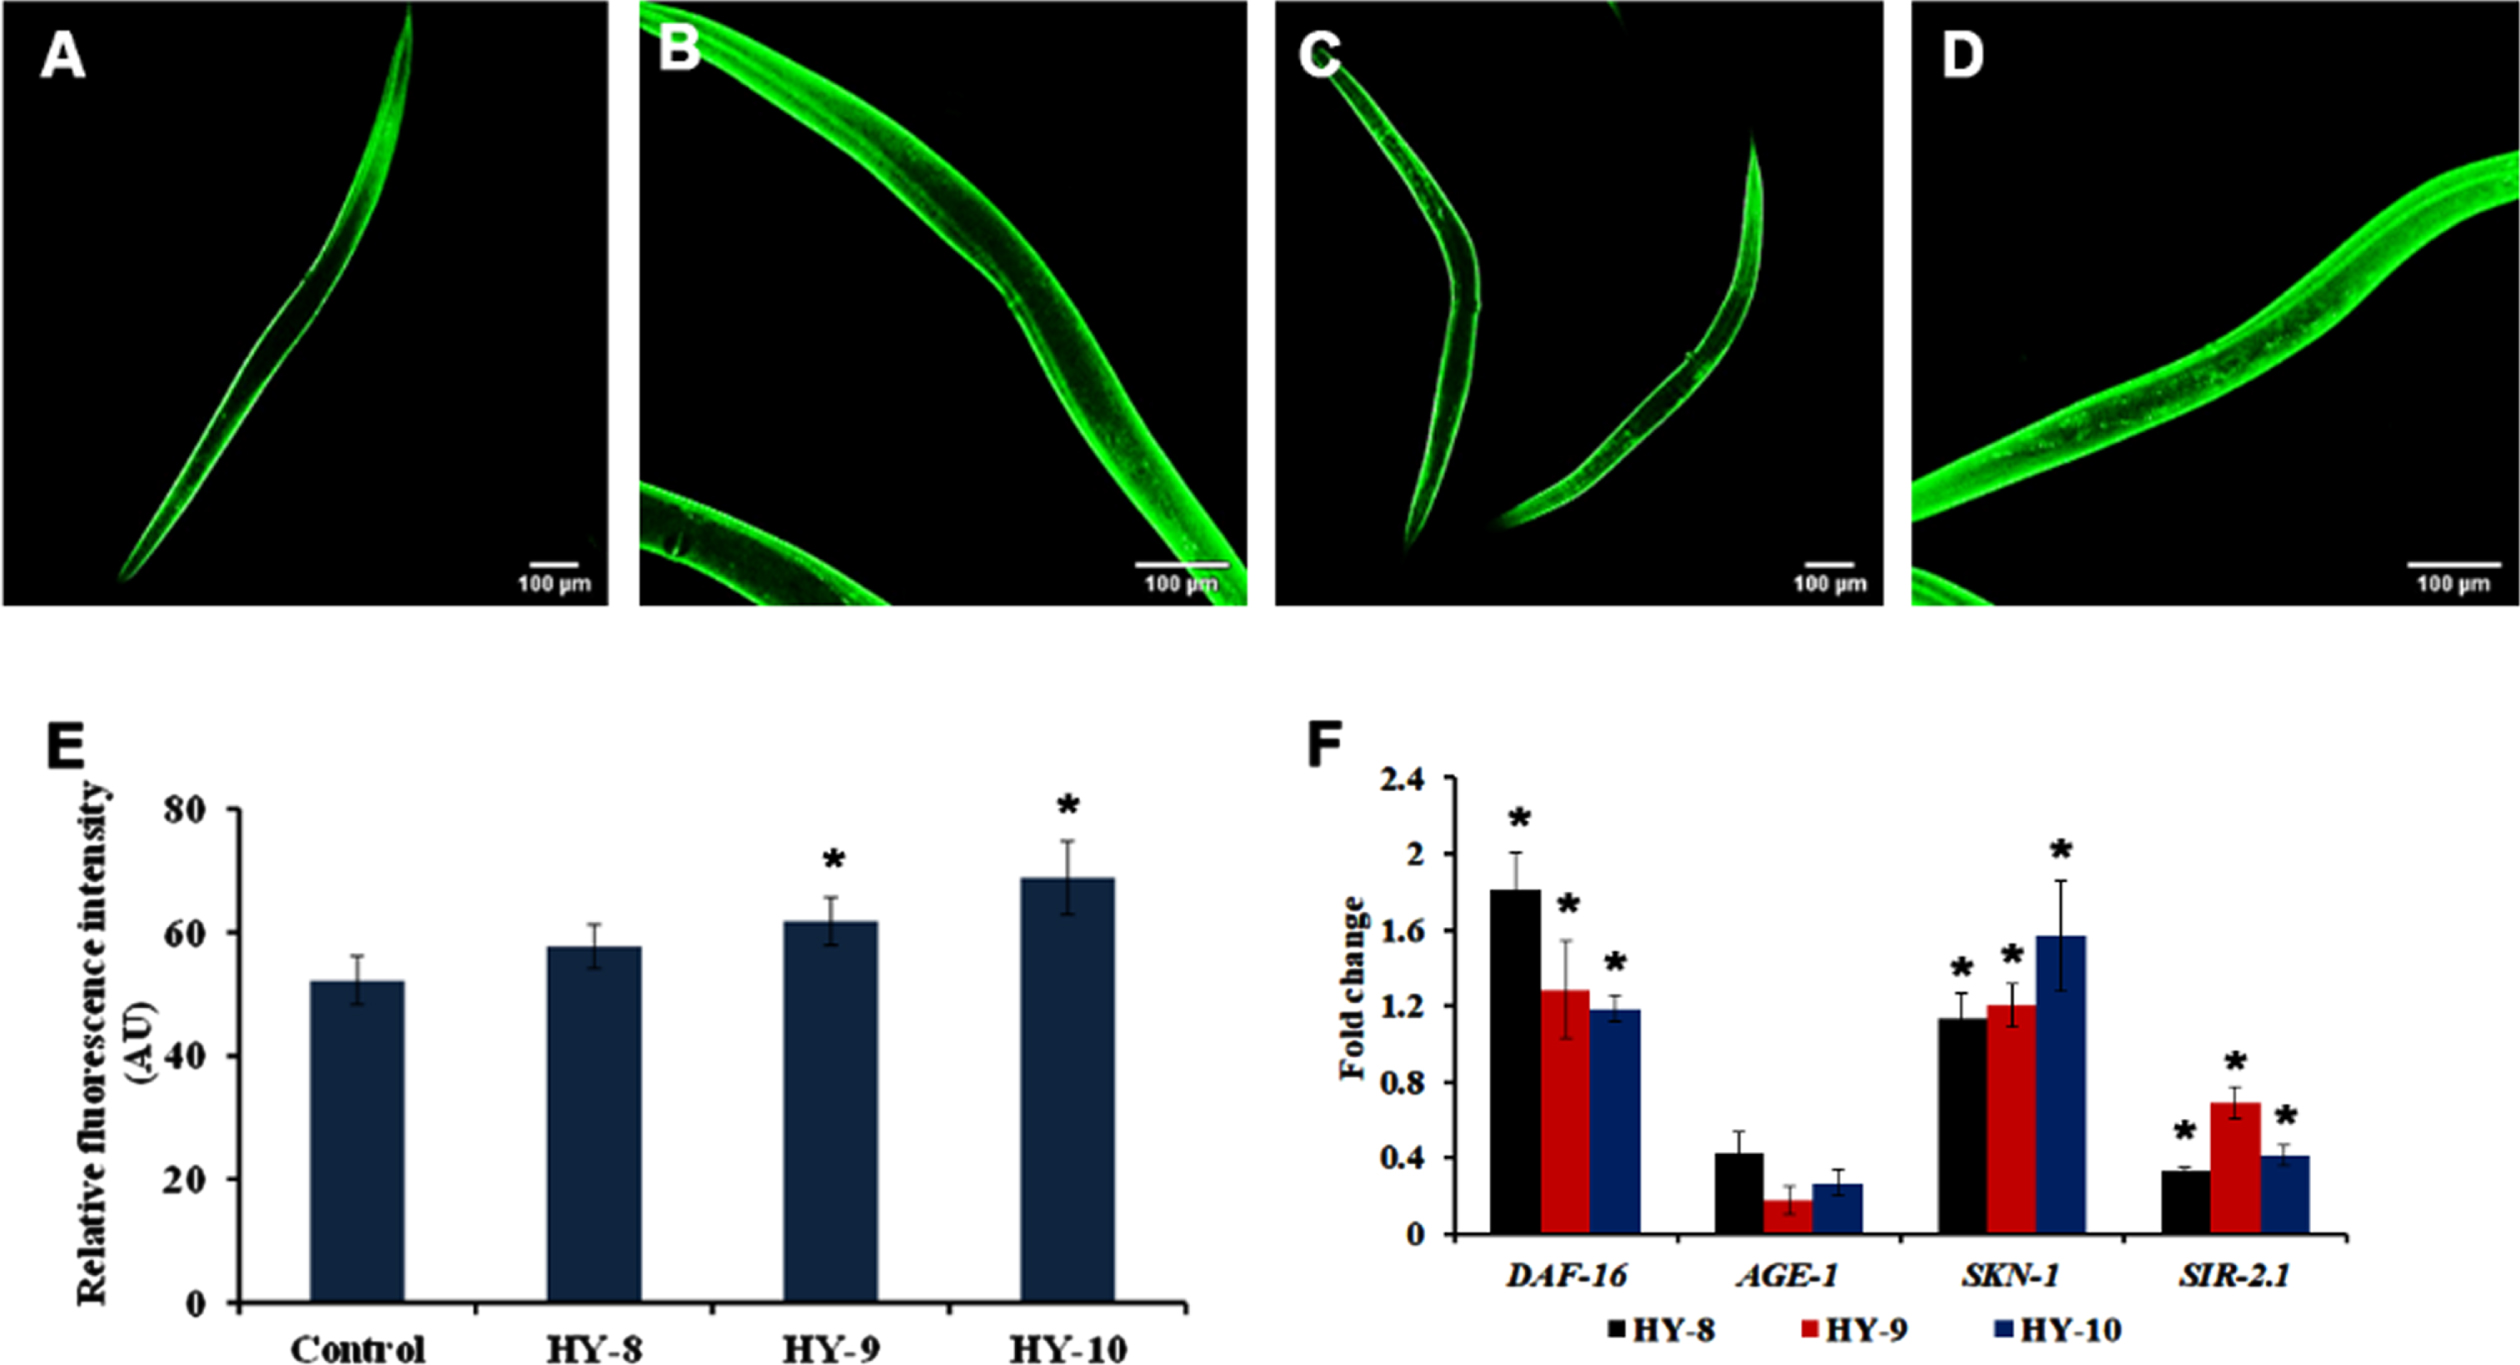 H. undatus extract can activate antioxidant potential by activating SKN-1 in C. elegans. (A) LG333 Control (B-D) LG333 treated with 8 –10μg/ml of H. undatus extract. (E) Quantification of fluorescence indicates significant increase in expression of SKN-1 at concentrations 9 and 10μg/ml of H. undatus extract (F) Real Time PCR analysis of daf-16, age-1, skn-1 and sir-2.1 was done in nematodes treated with 8 –10μg/ml of H. undatus extract.